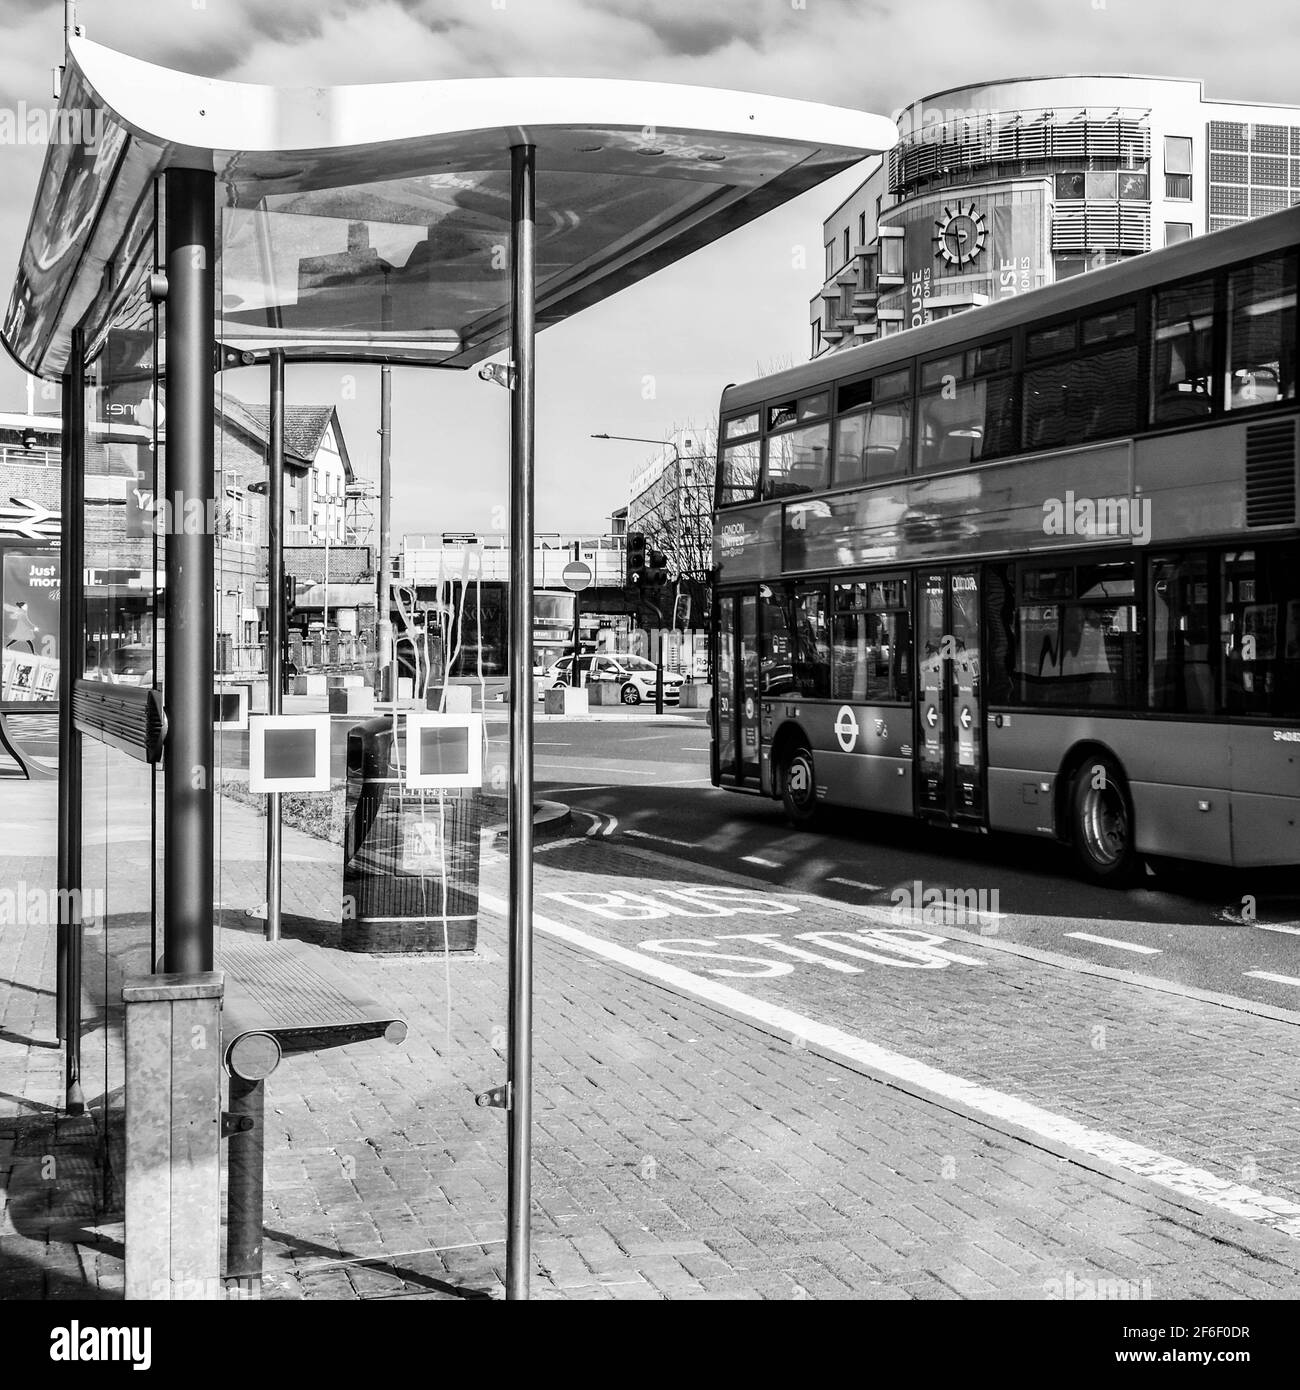 Black And White Image Of A Modern Designed Public Bus Shelter Or Stop With A Passing Bus And No People Stock Photo